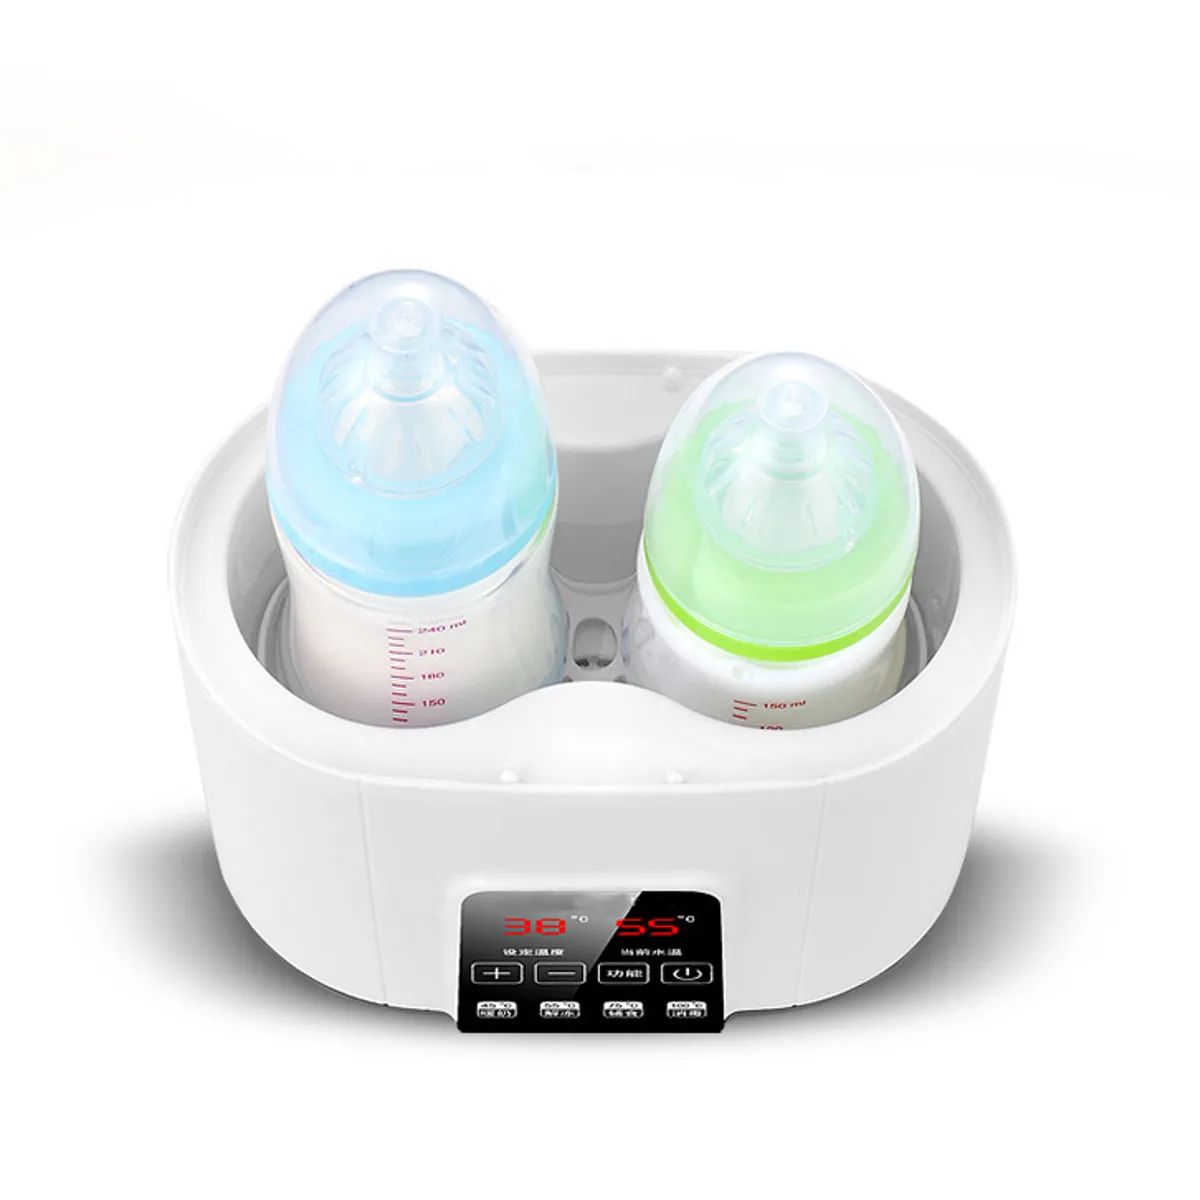 220V Multifunction Automatic Intelligent Thermostat Baby Bottle Warmers Baby Milk Bottle Disinfection Fast Warm Milk Sterilizers